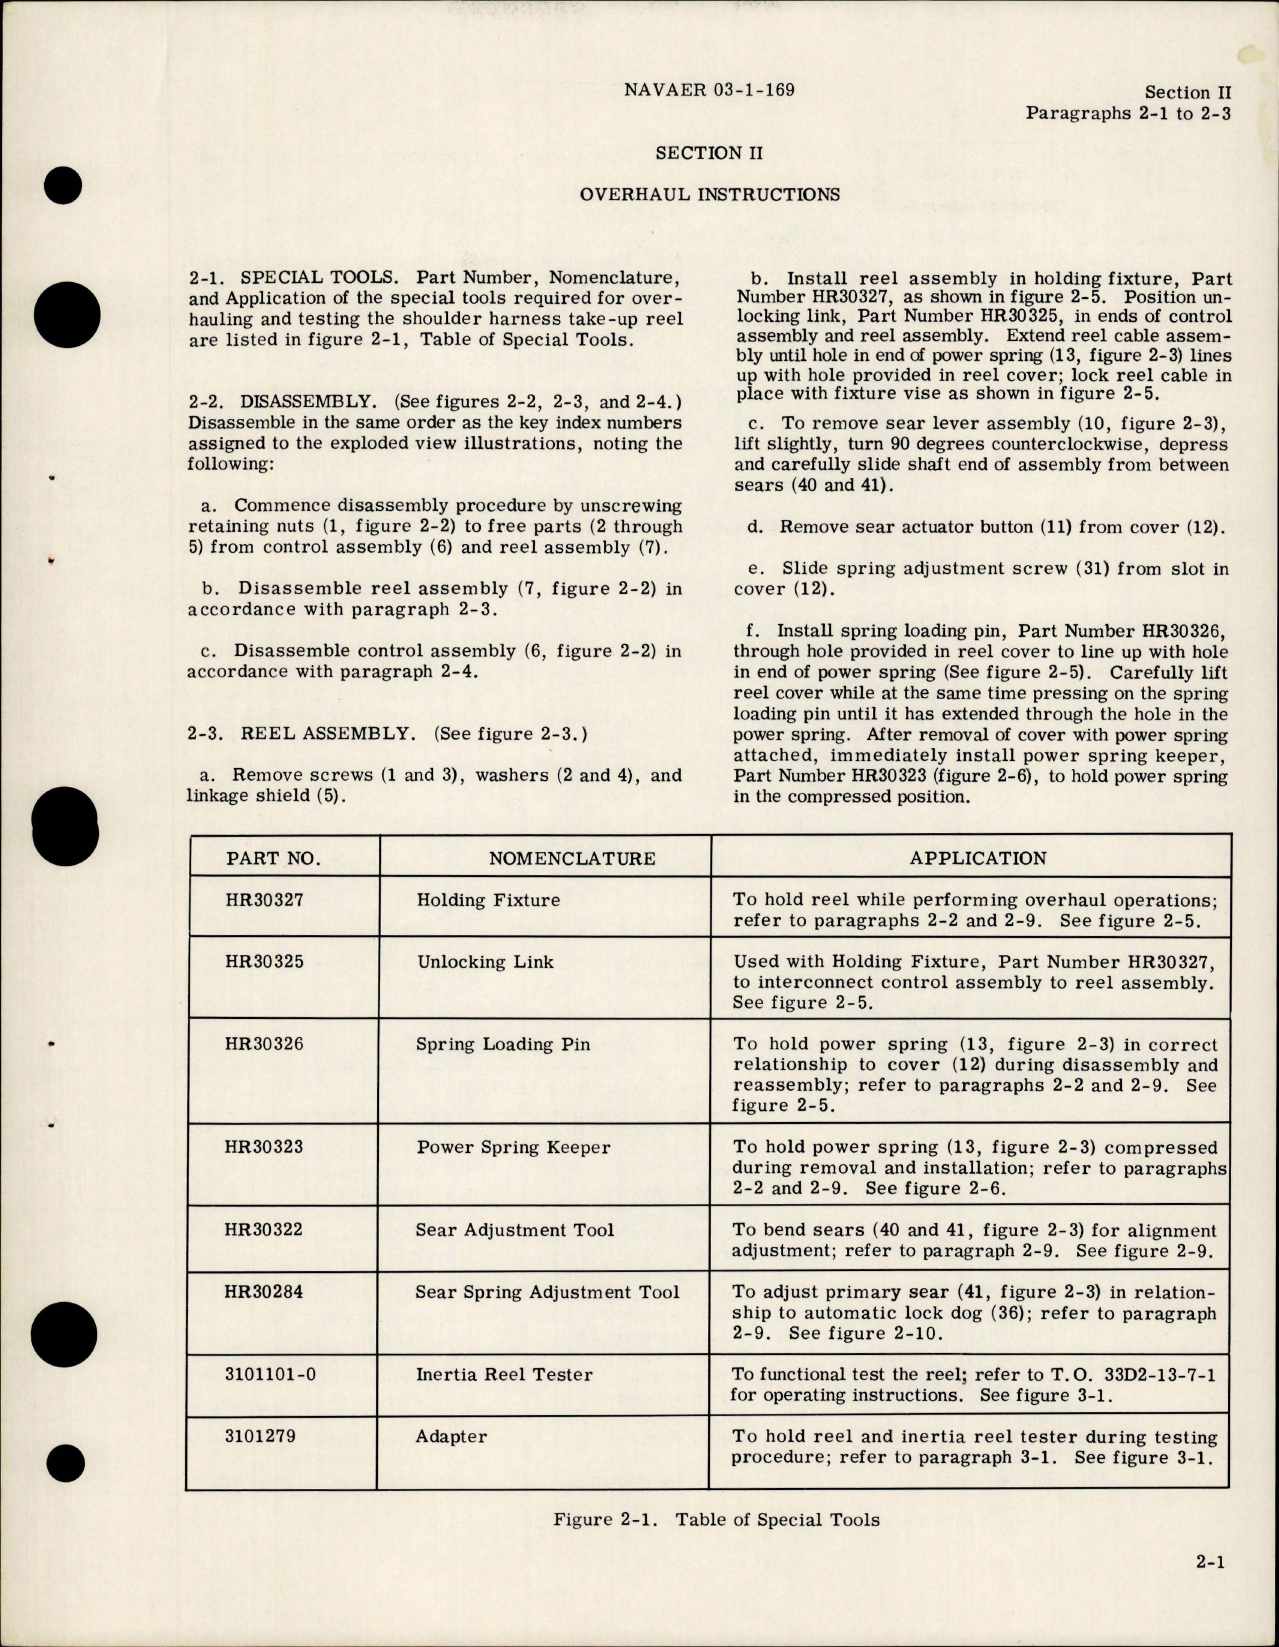 Sample page 7 from AirCorps Library document: Overhaul Instructions for Shoulder Harness Take-Up Reels